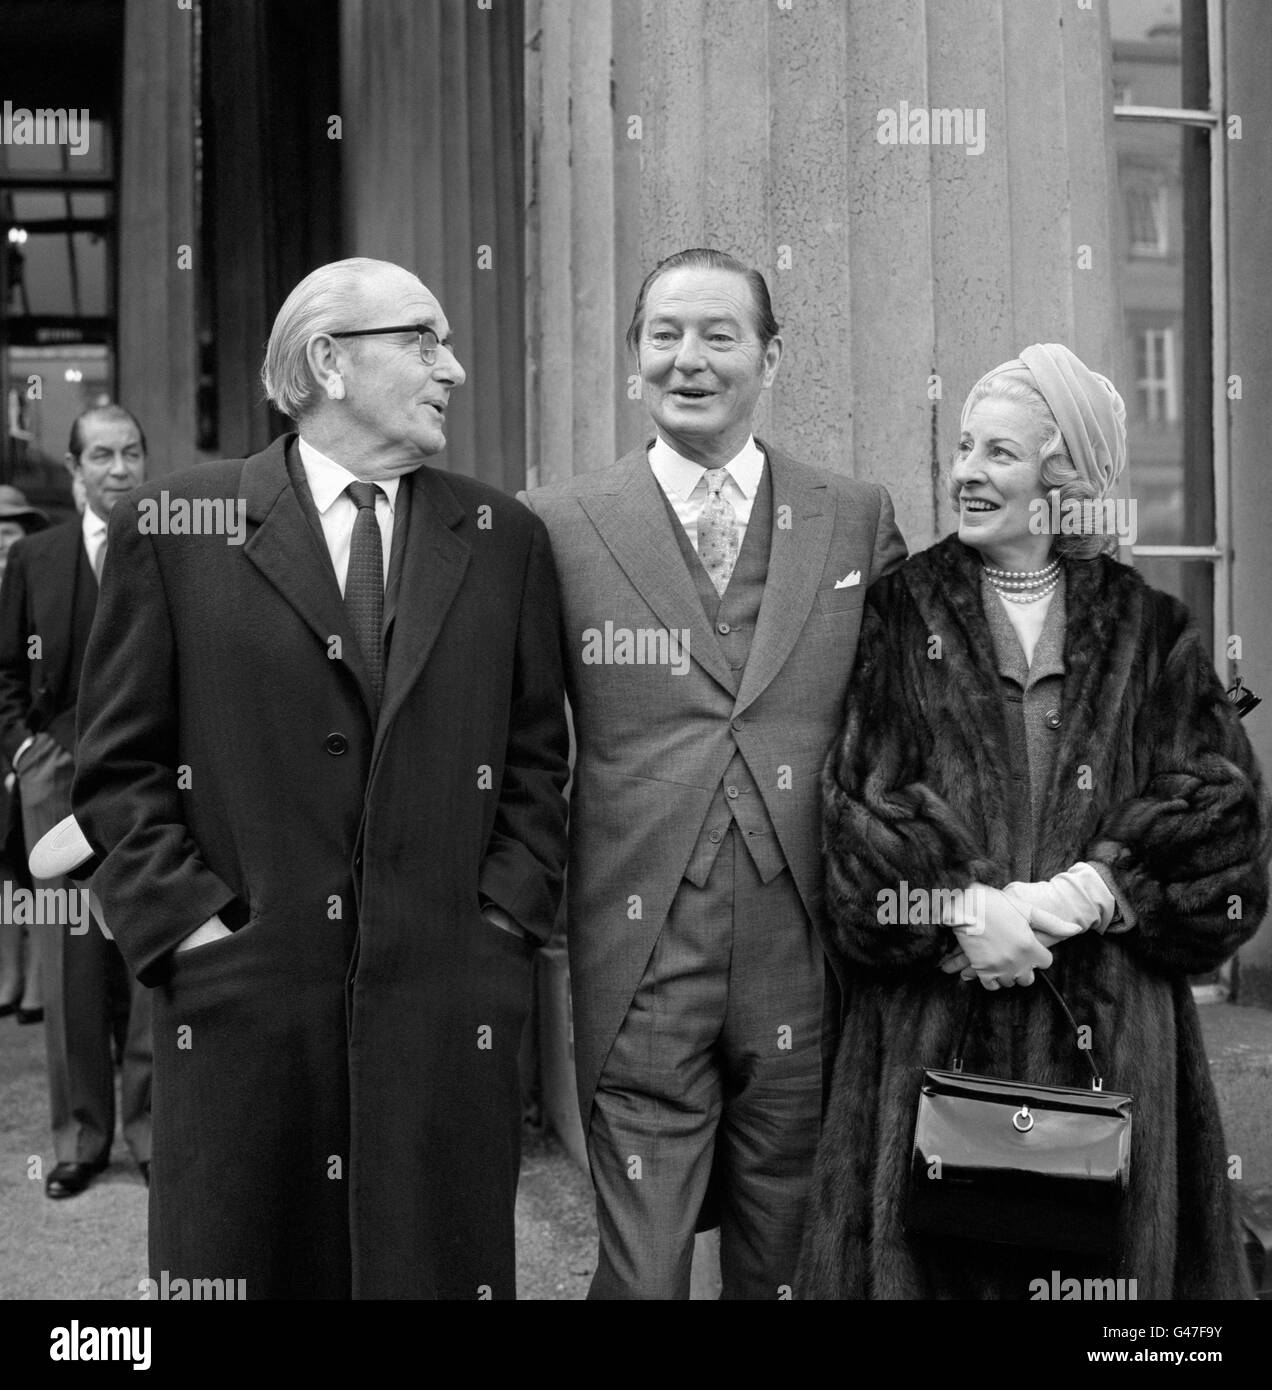 Playwright Sir Terence Rattigan (c) with producer Mr Harold French (l) and Mrs French (r) as he left Buckingham Palace after receiving the accolade as a Knight Bachelor from Queen Elizabeth the Queen Mother at an investiture. Mr French produced Mr Rattigan's first play. Stock Photo